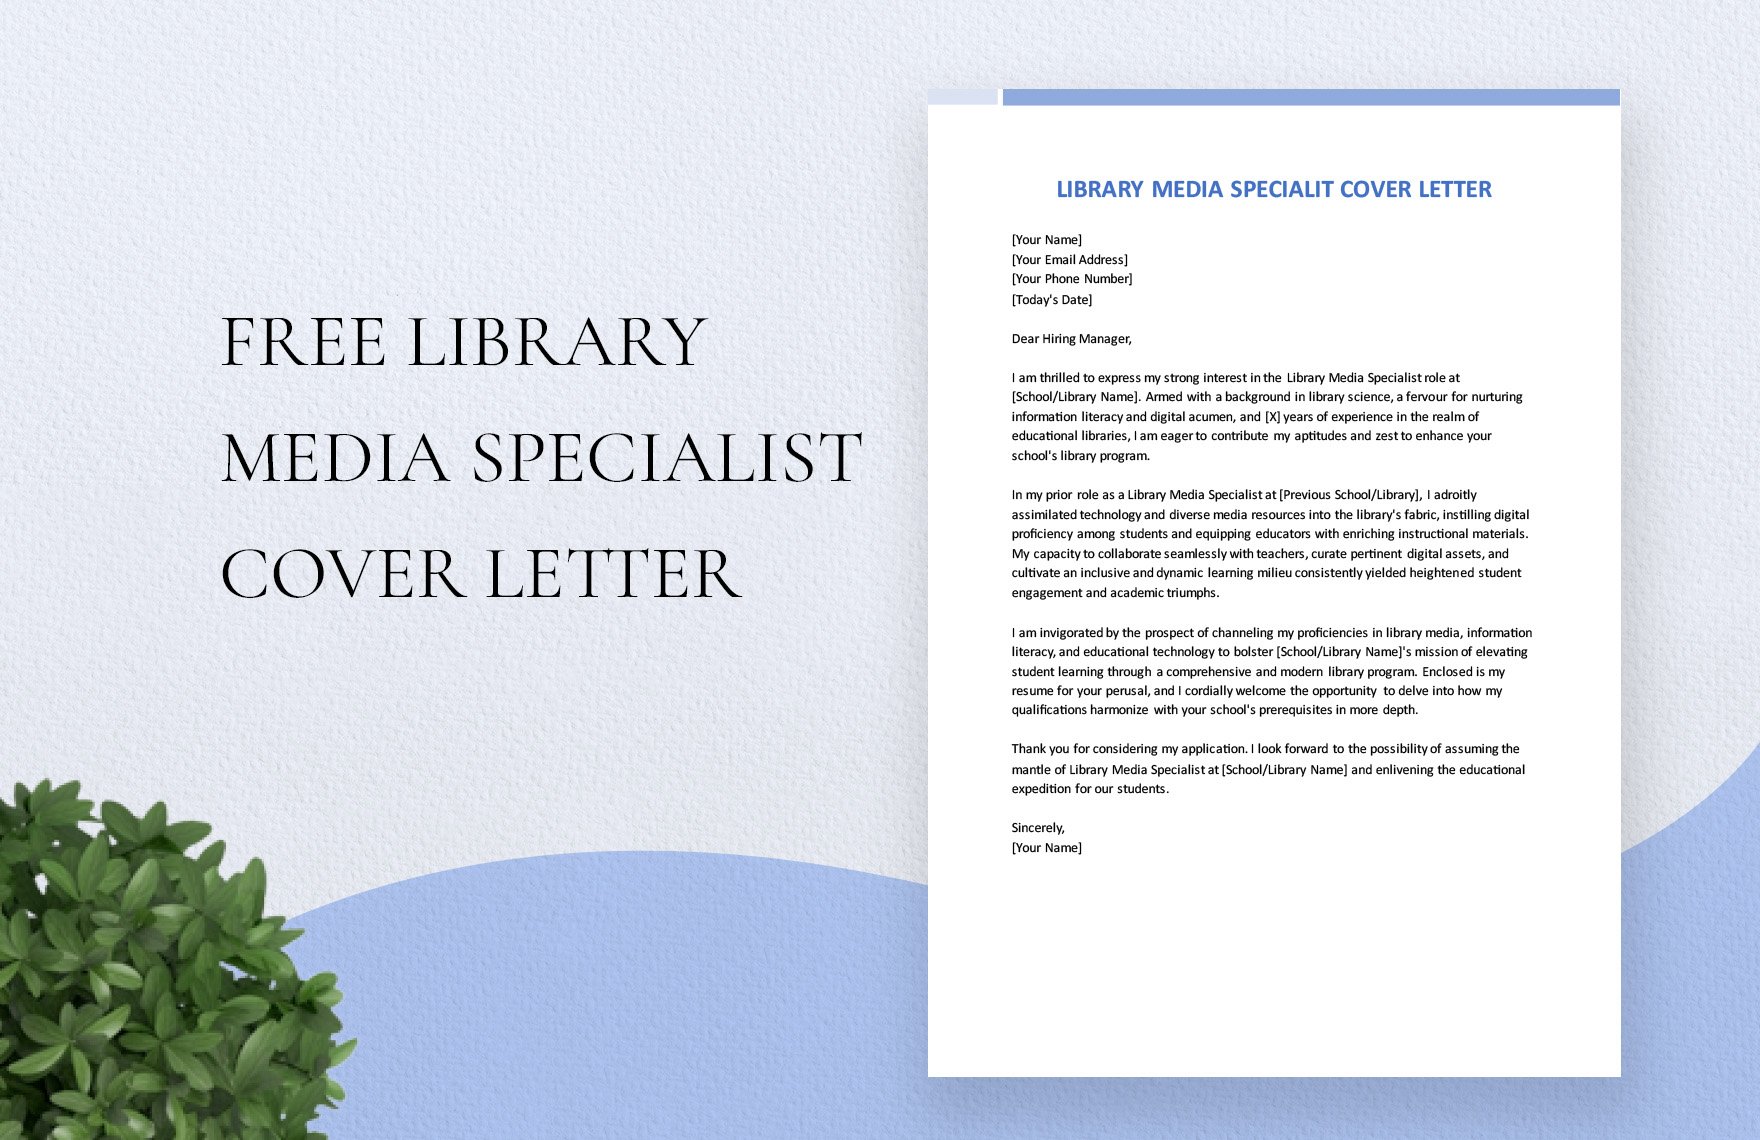 Free Library Media Specialist Cover Letter in Word, Google Docs, PDF